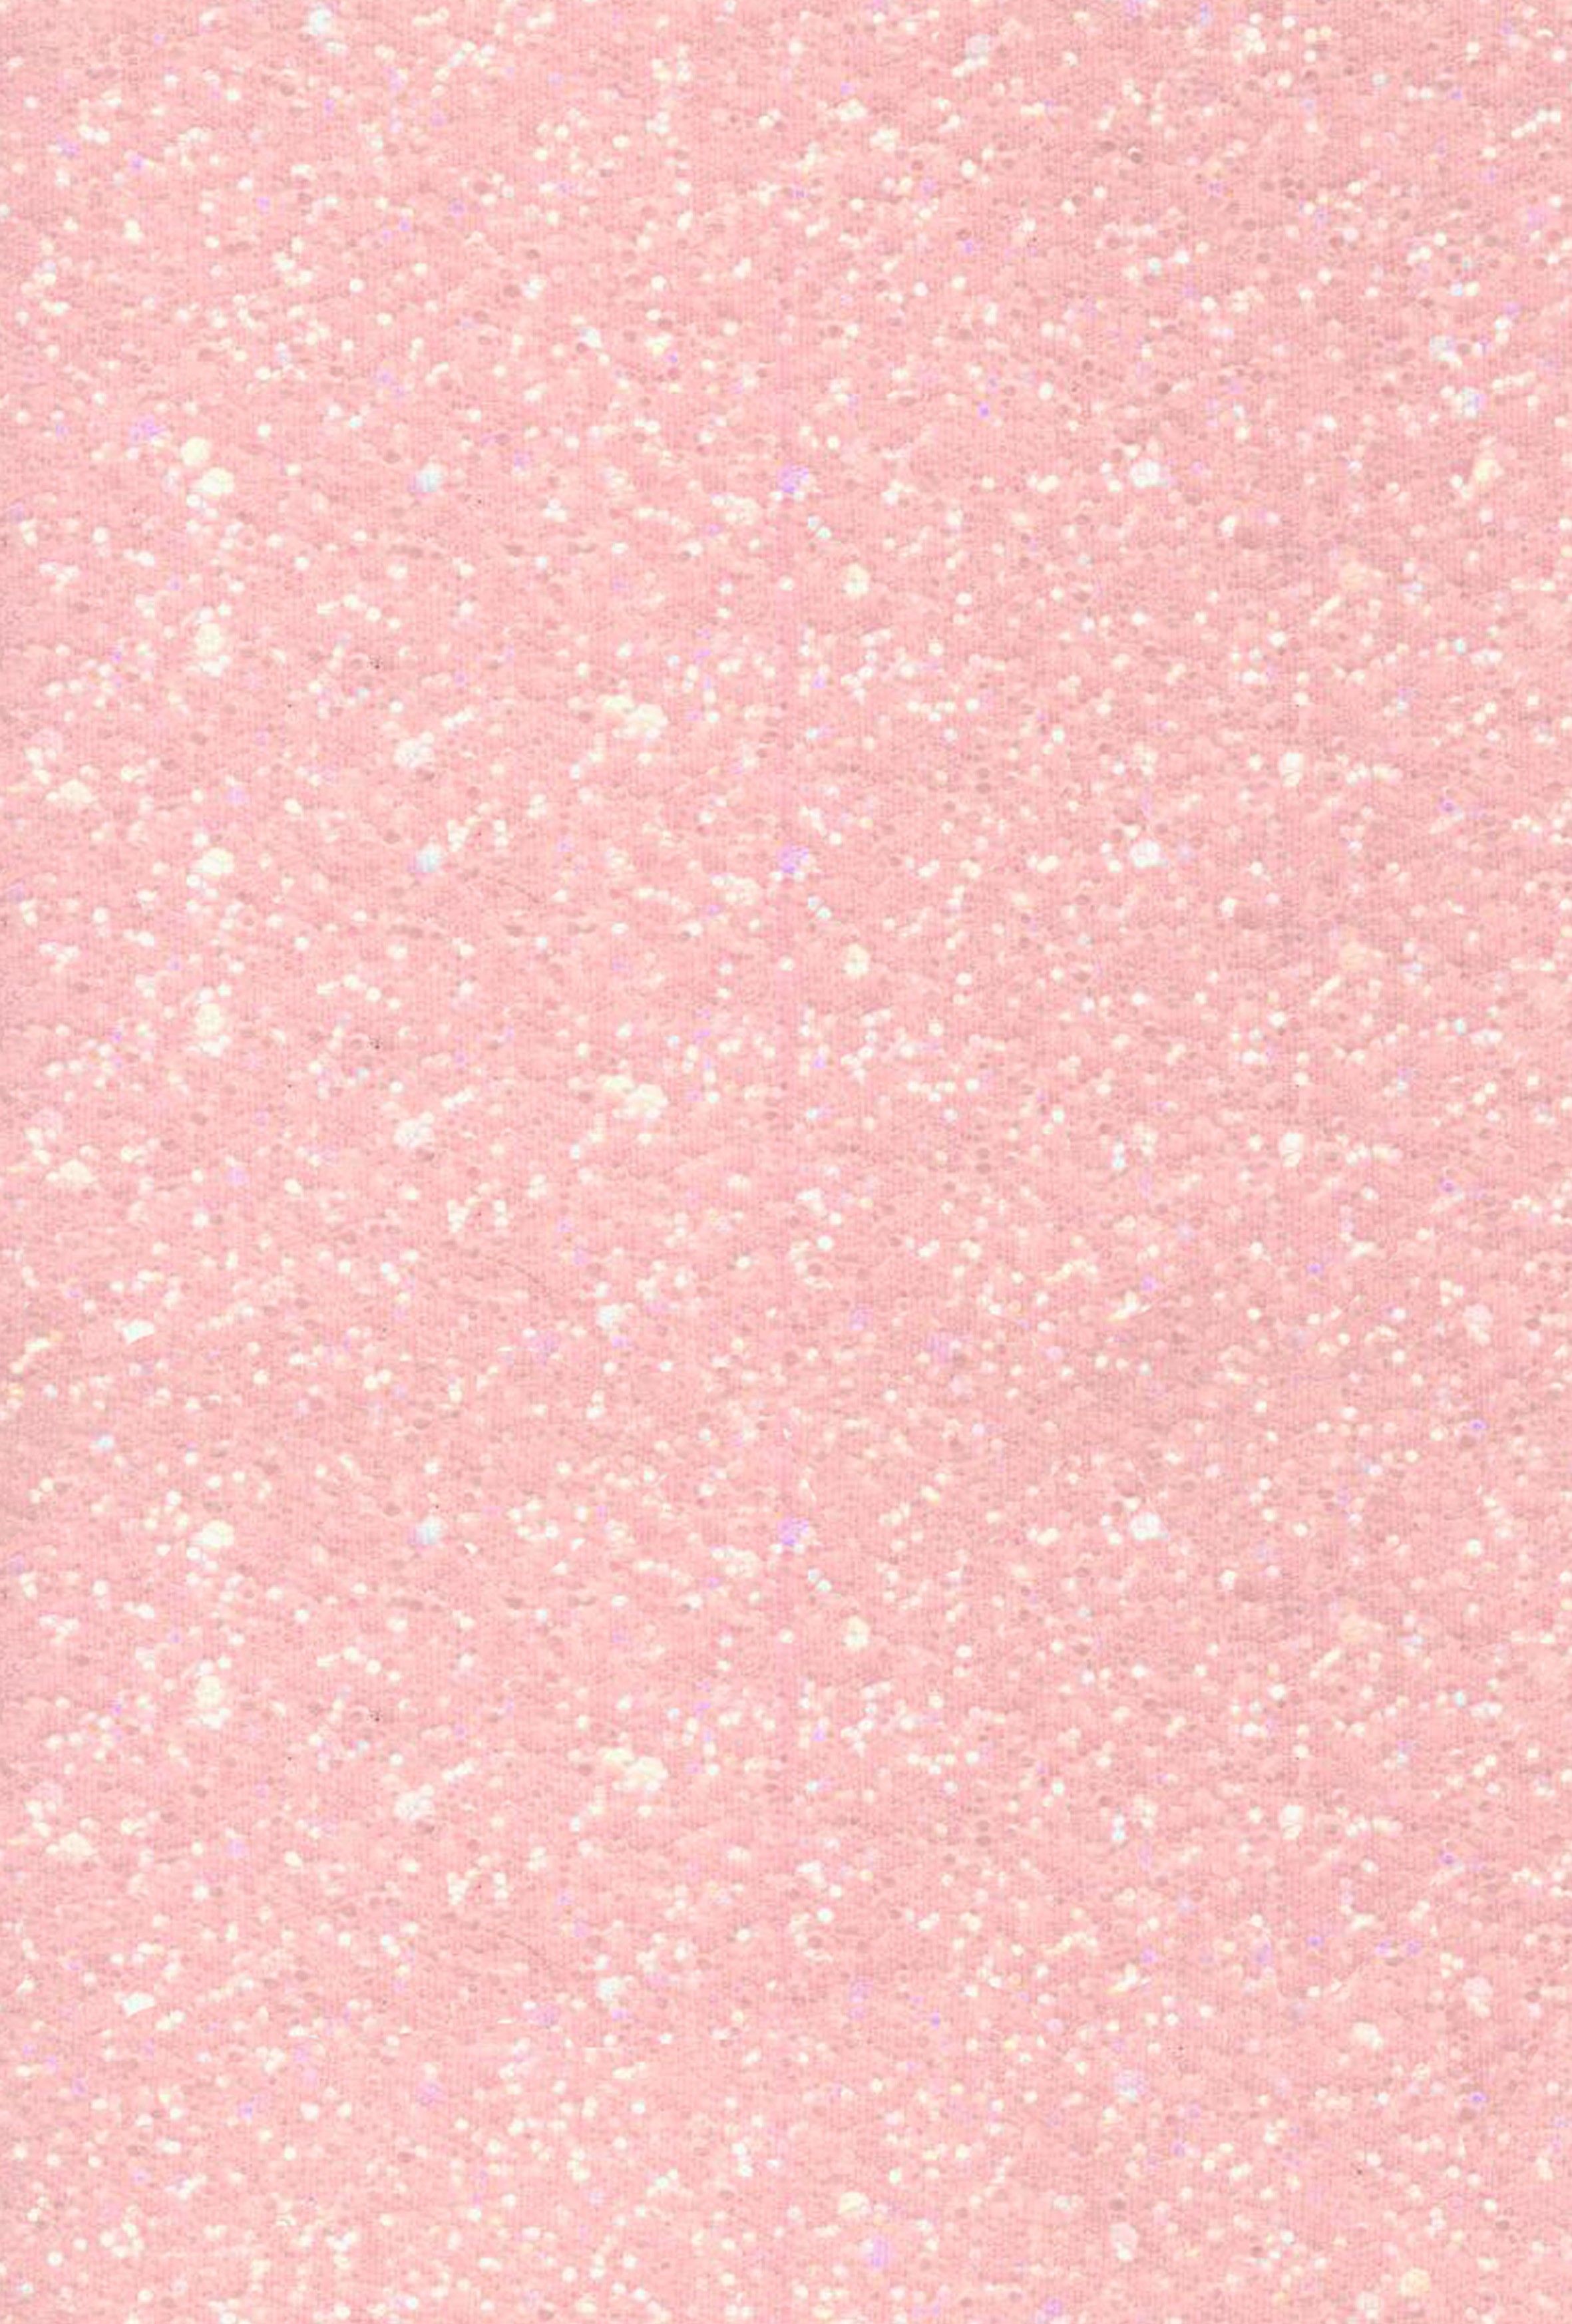 A sheet of hand painted tissue paper in a pink glitter design. - Glitter